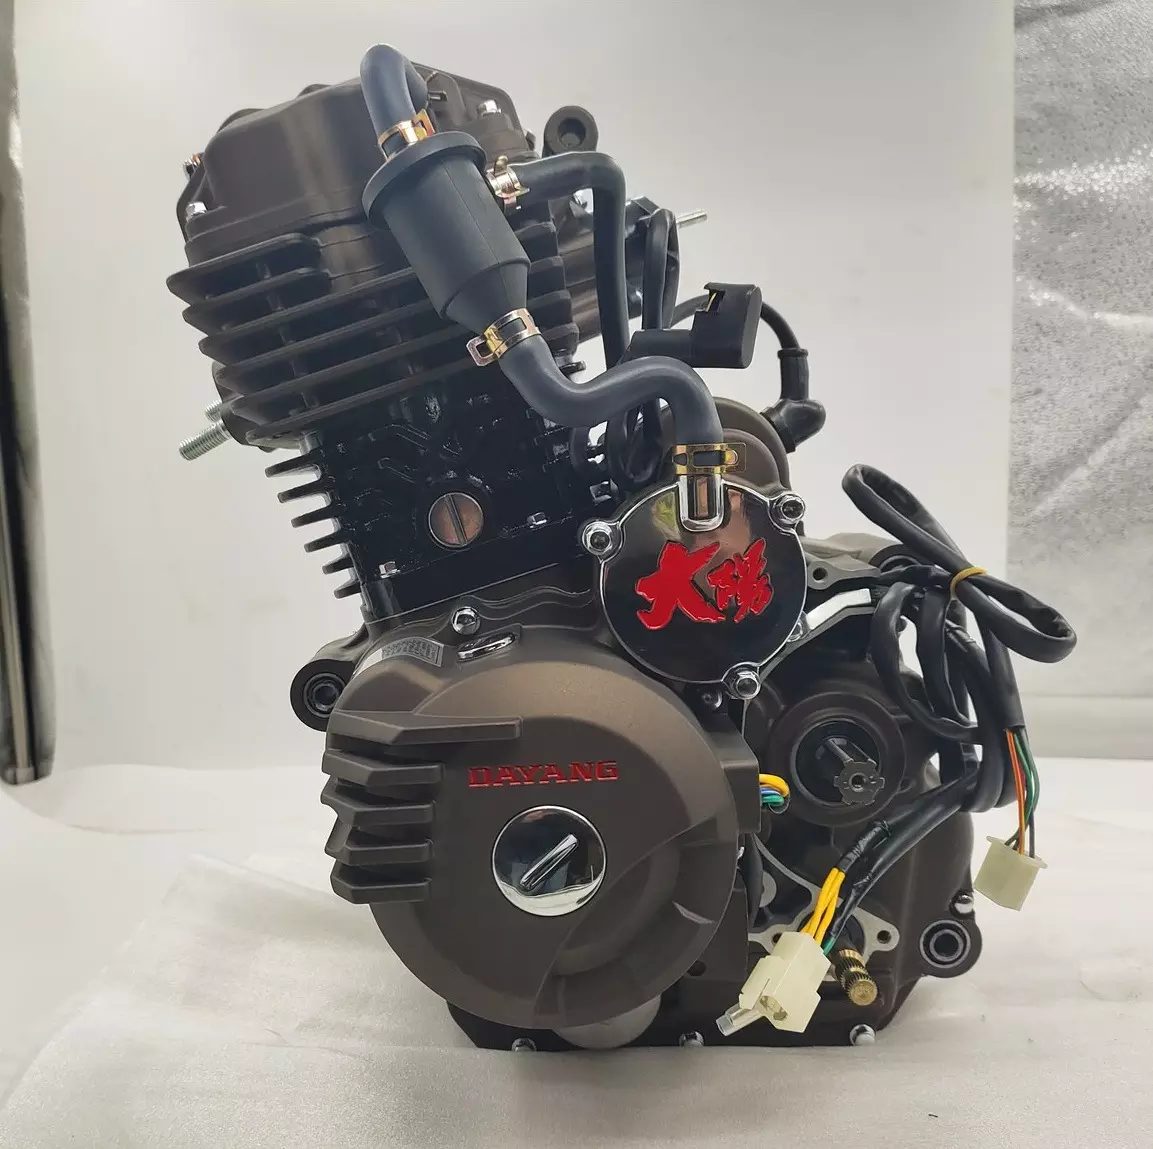 DAYANG LF 300cc water cooled tricycl engine 3 Wheels Motorcycle Engine Assembly other motorcycles engine system for ATV UTV